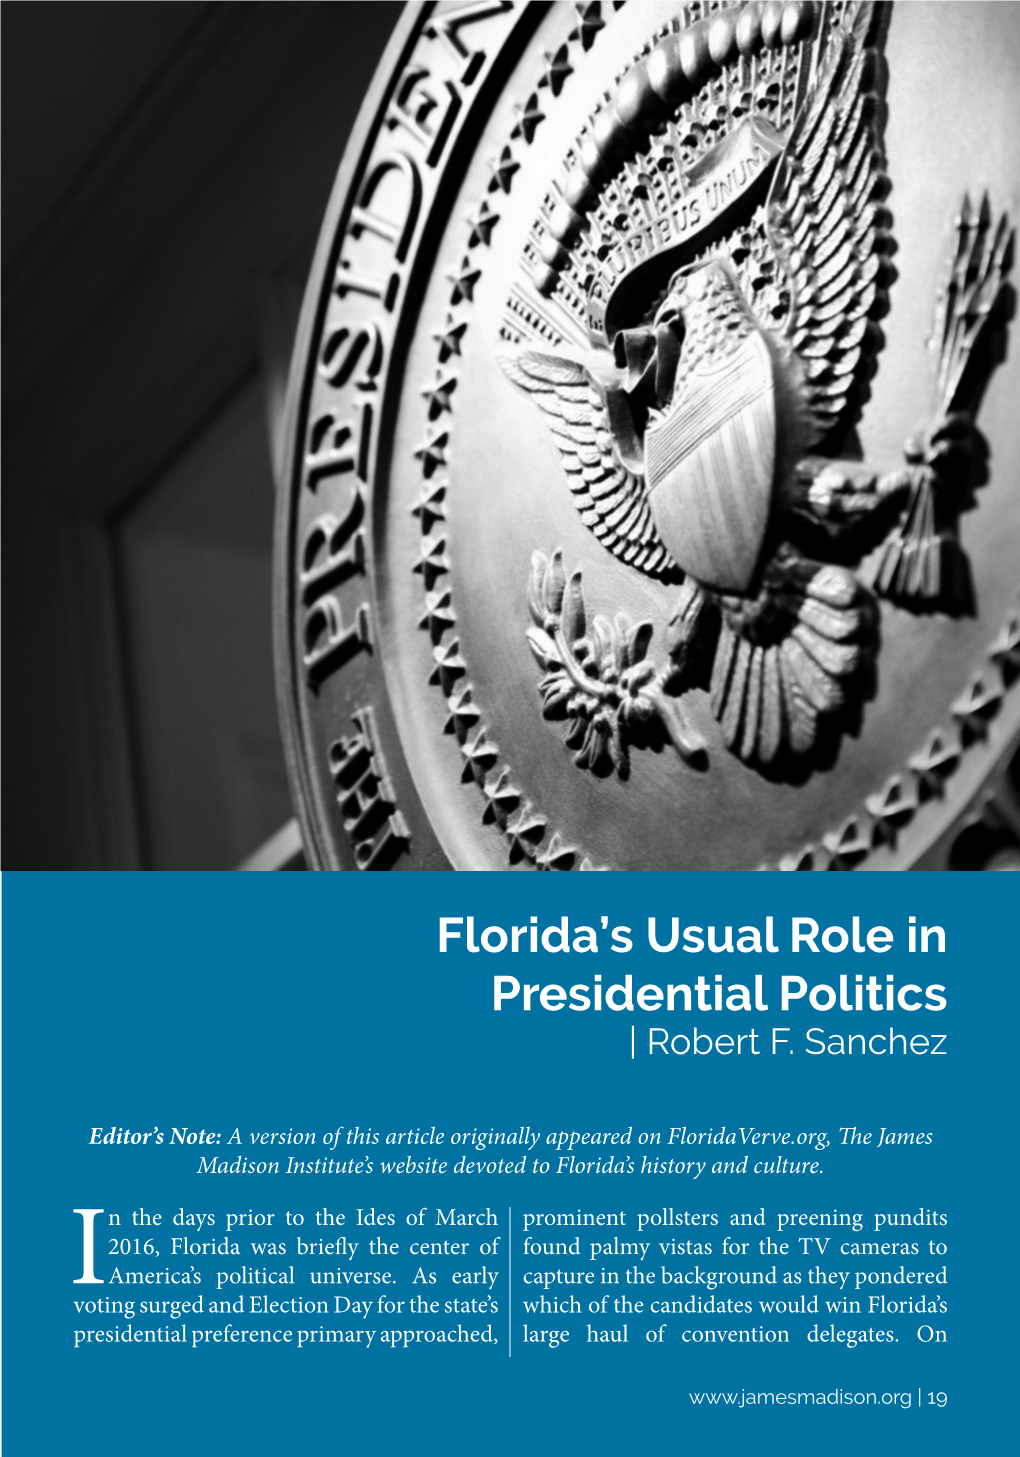 Florida's Usual Role in Presidential Politics